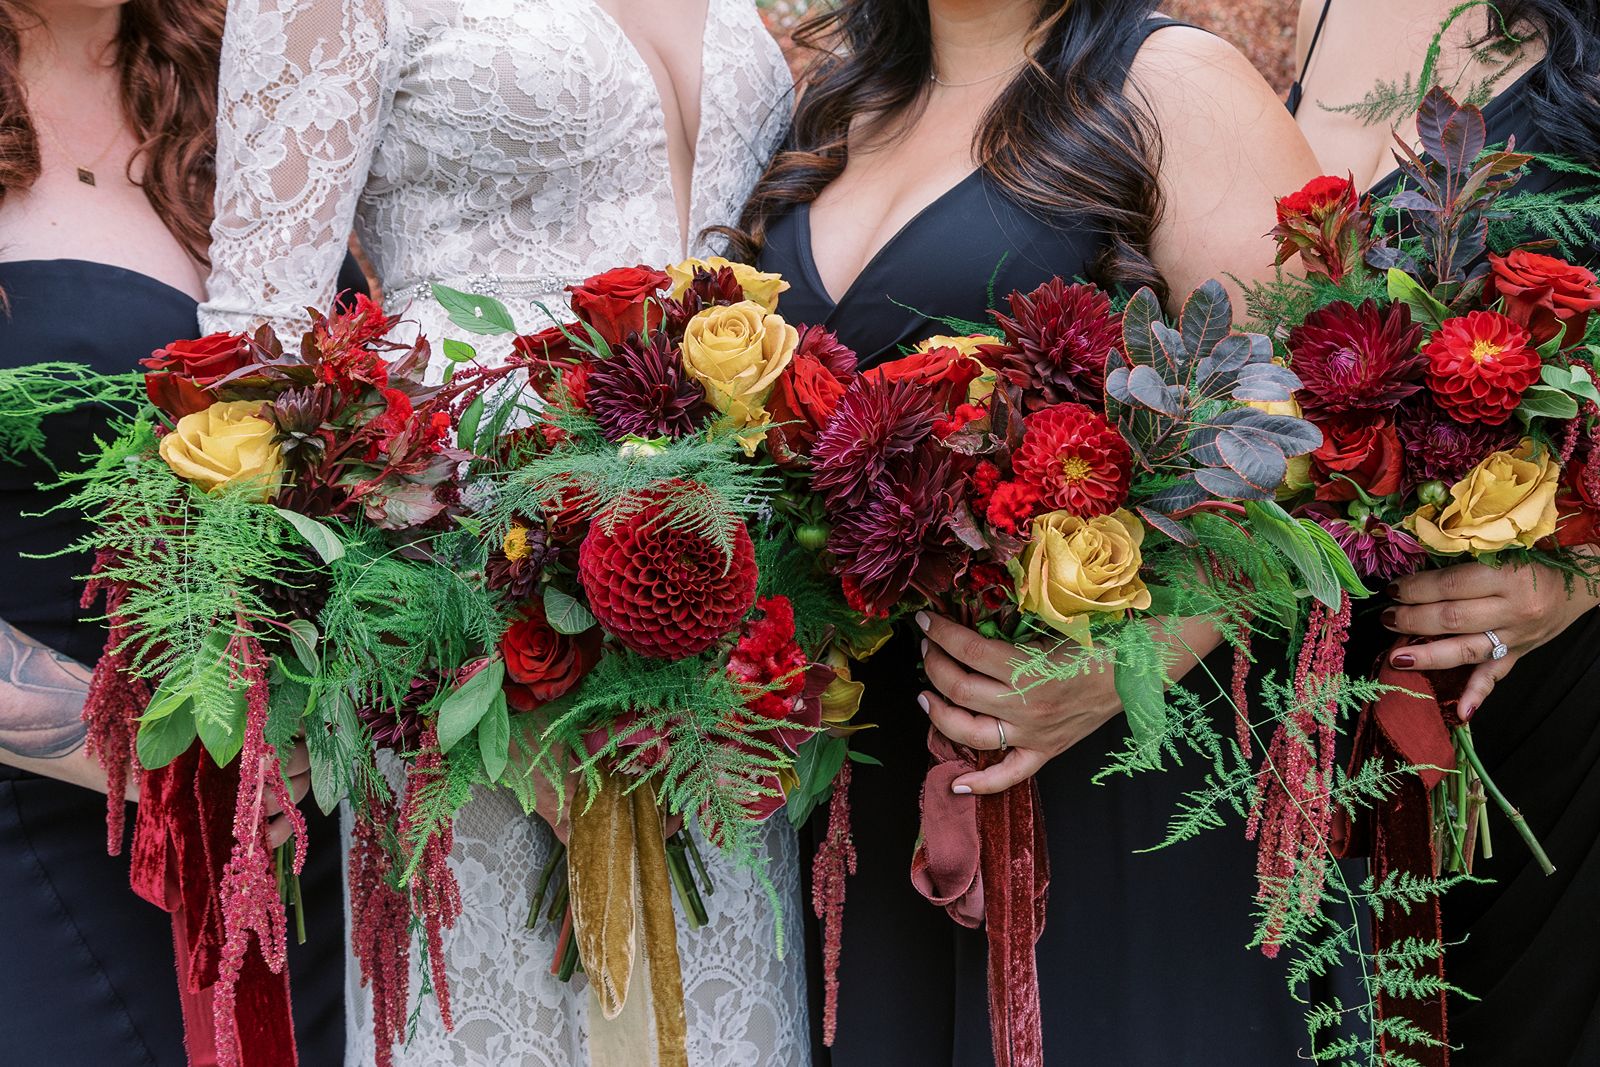 Bridal party holding their ceremony flowers